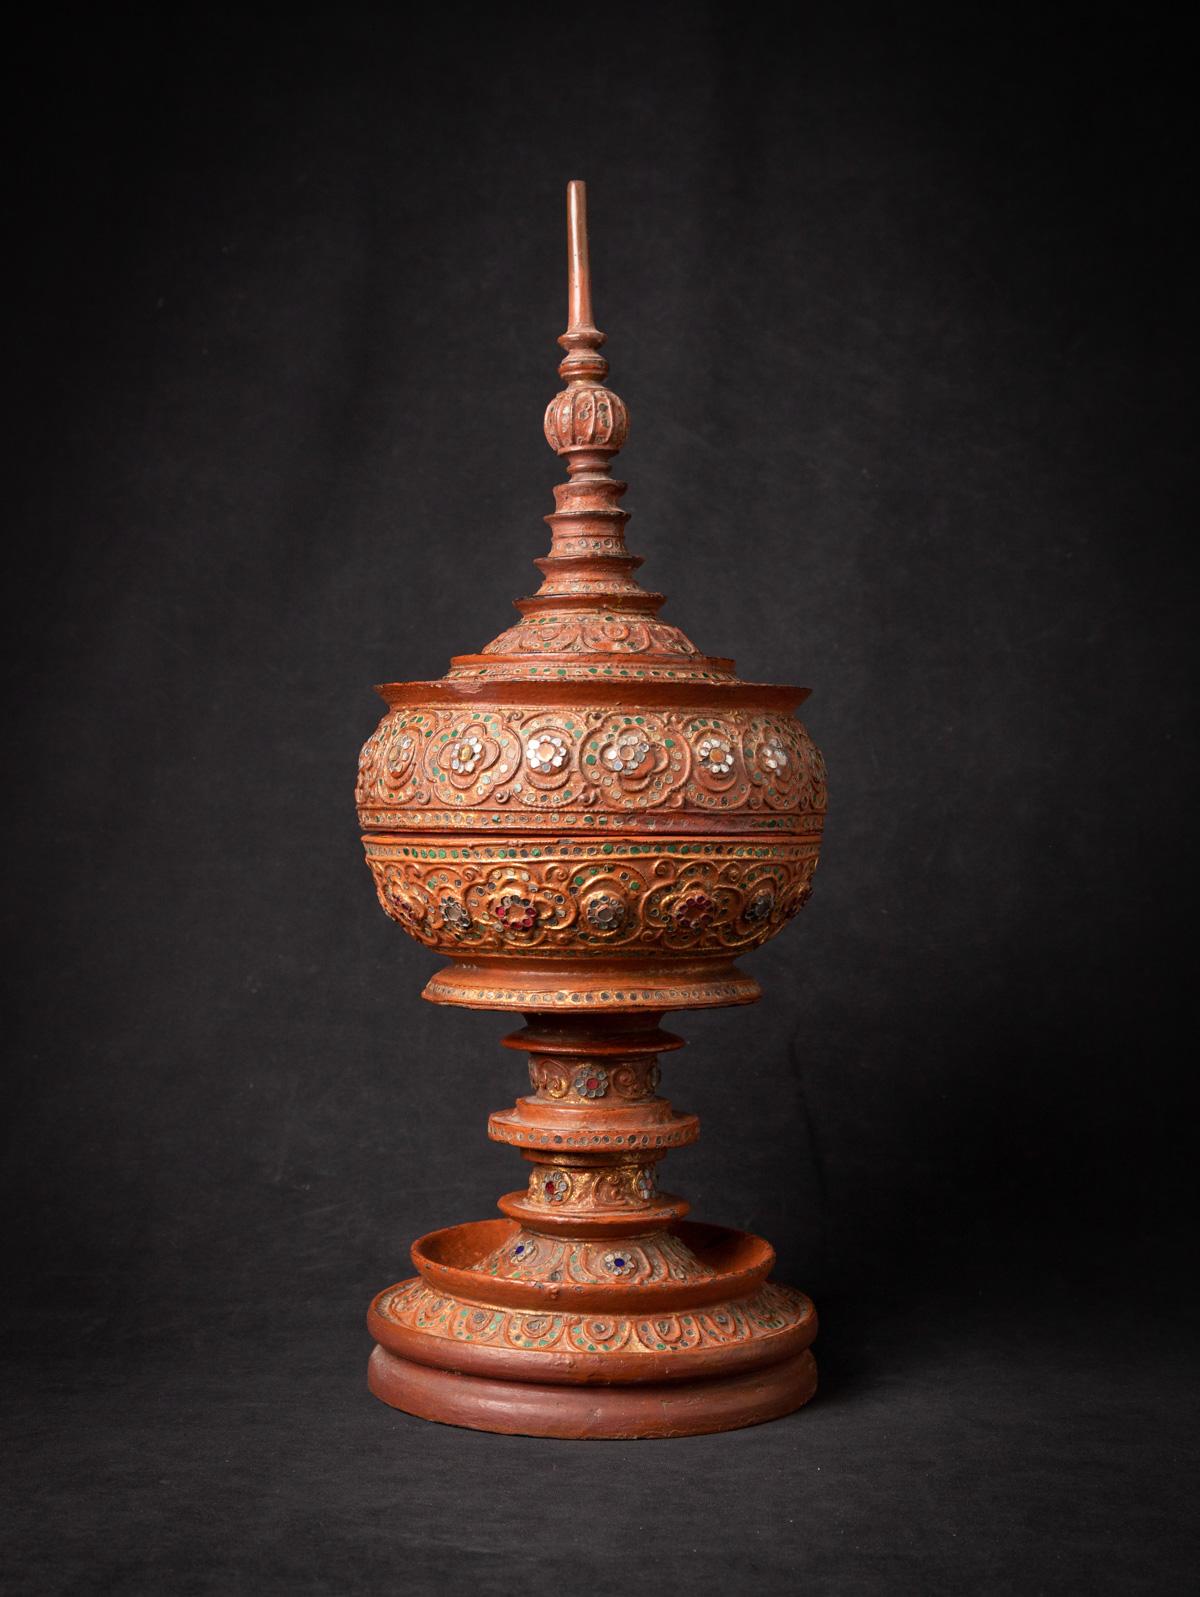 Material : wood
53,5 cm high
21 cm diameter
With traces of 24 krt. gilding
Mandalay style
19th century
Weight: 1,4 kgs
Originating from Burma
Nr: 3678-6